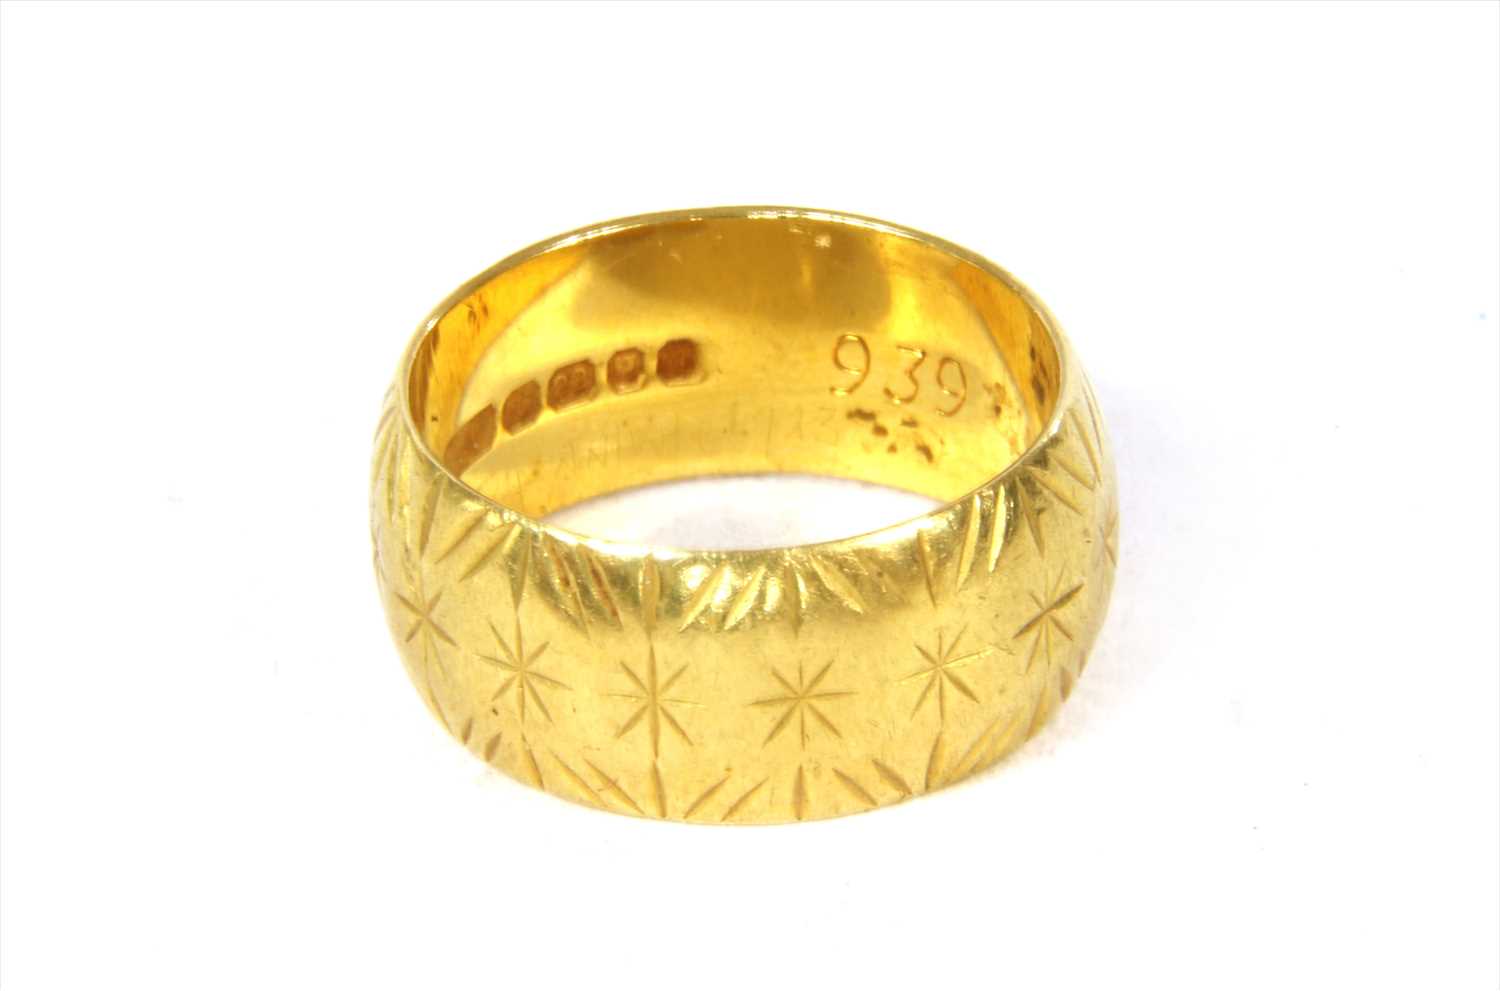 Lot 42 - A 22ct gold wedding ring